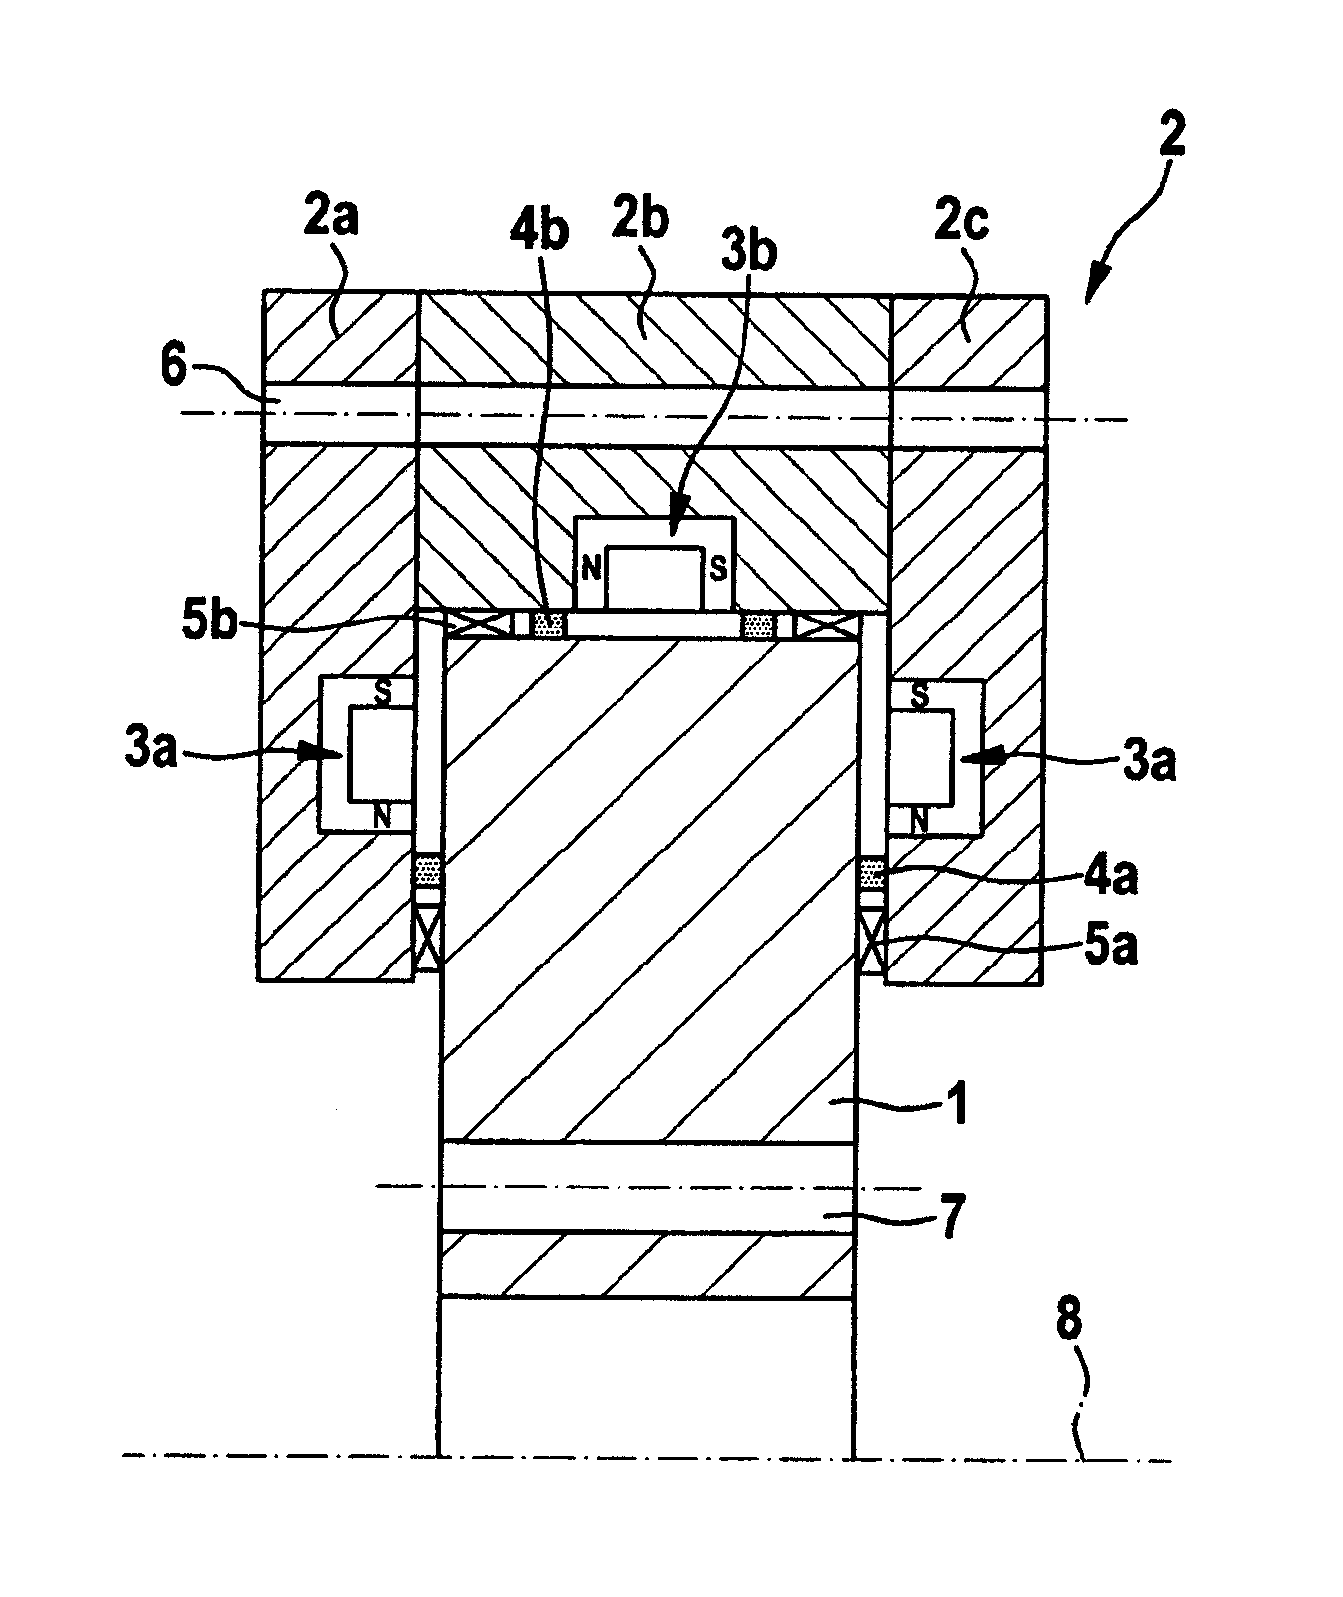 Method and bearing for supporting rotatable devices, particularly a medical scanner